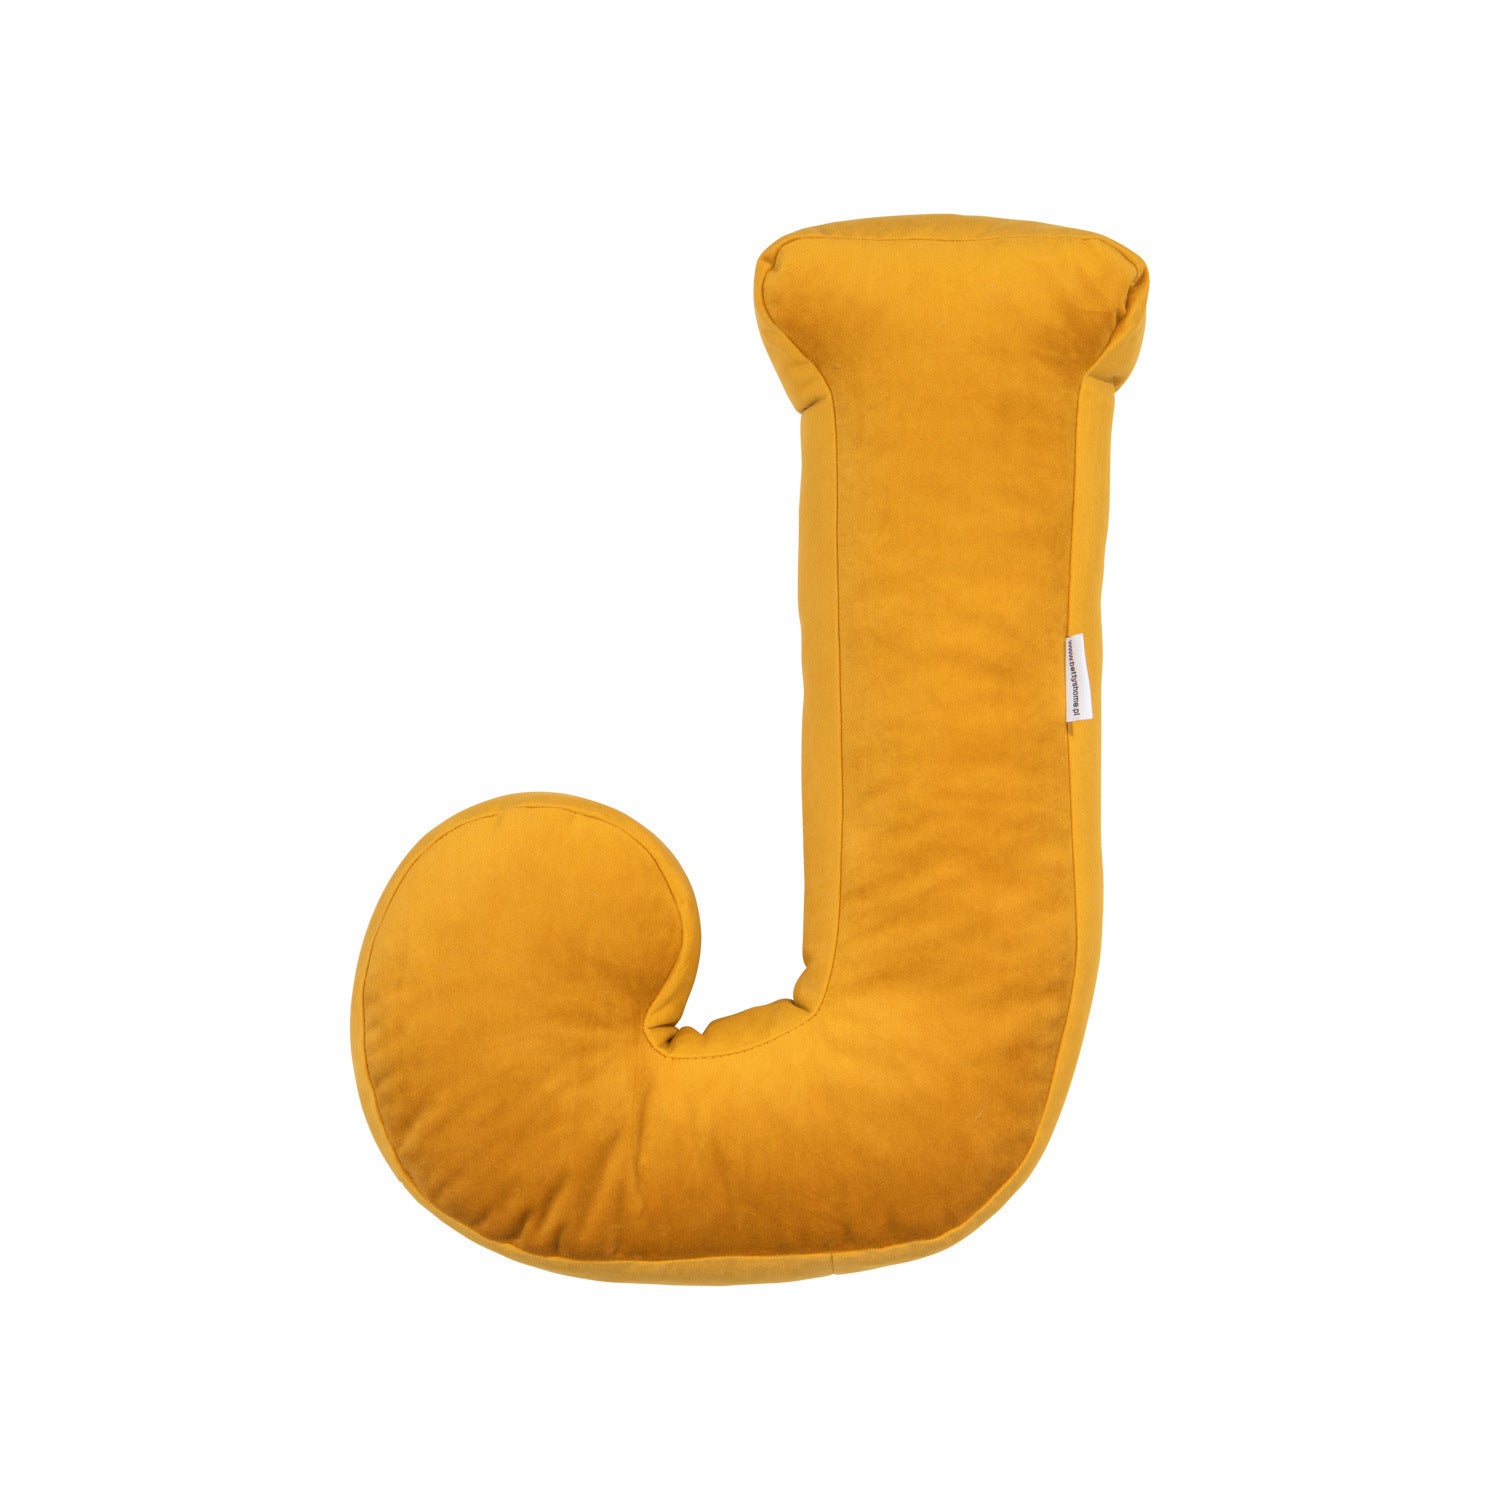 ABC - letters of the Alphabet - Pillows